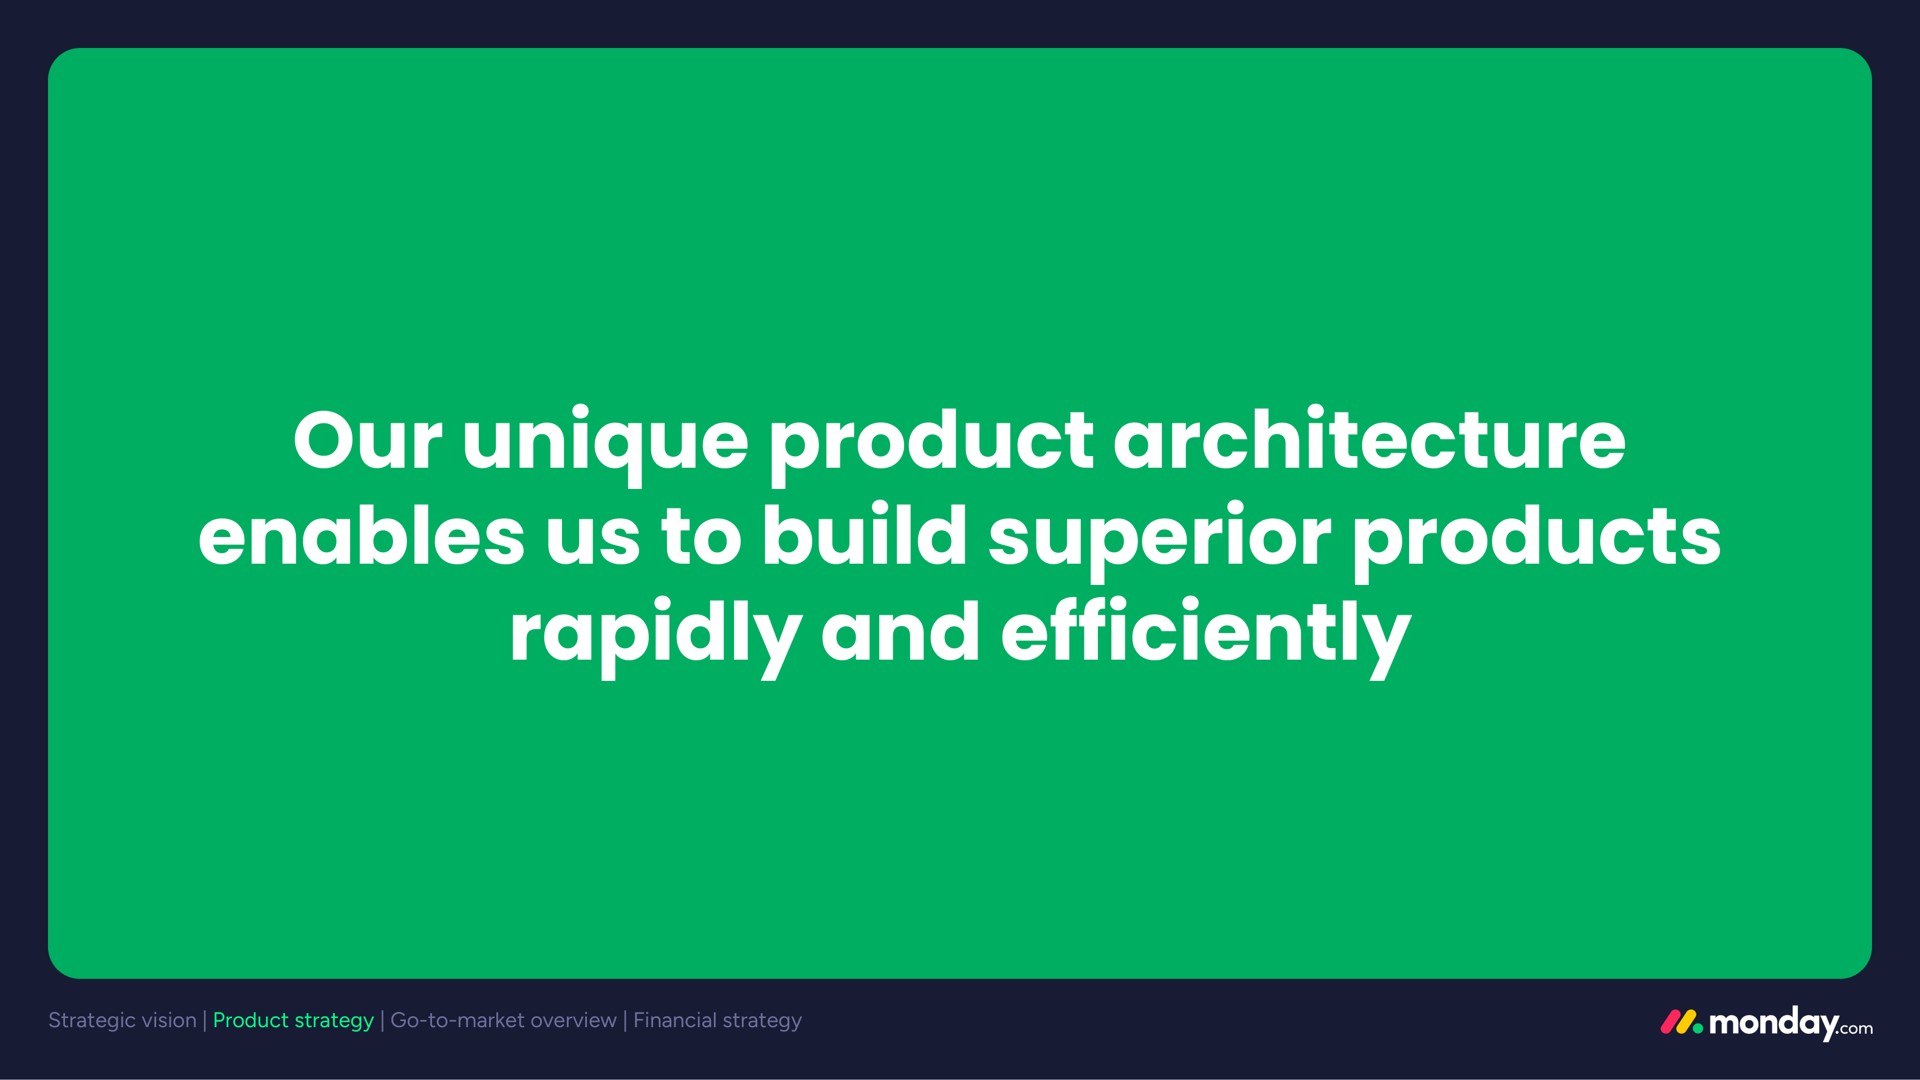 our unique product architecture enables us to build superior products rapidly and efficiently | monday.com